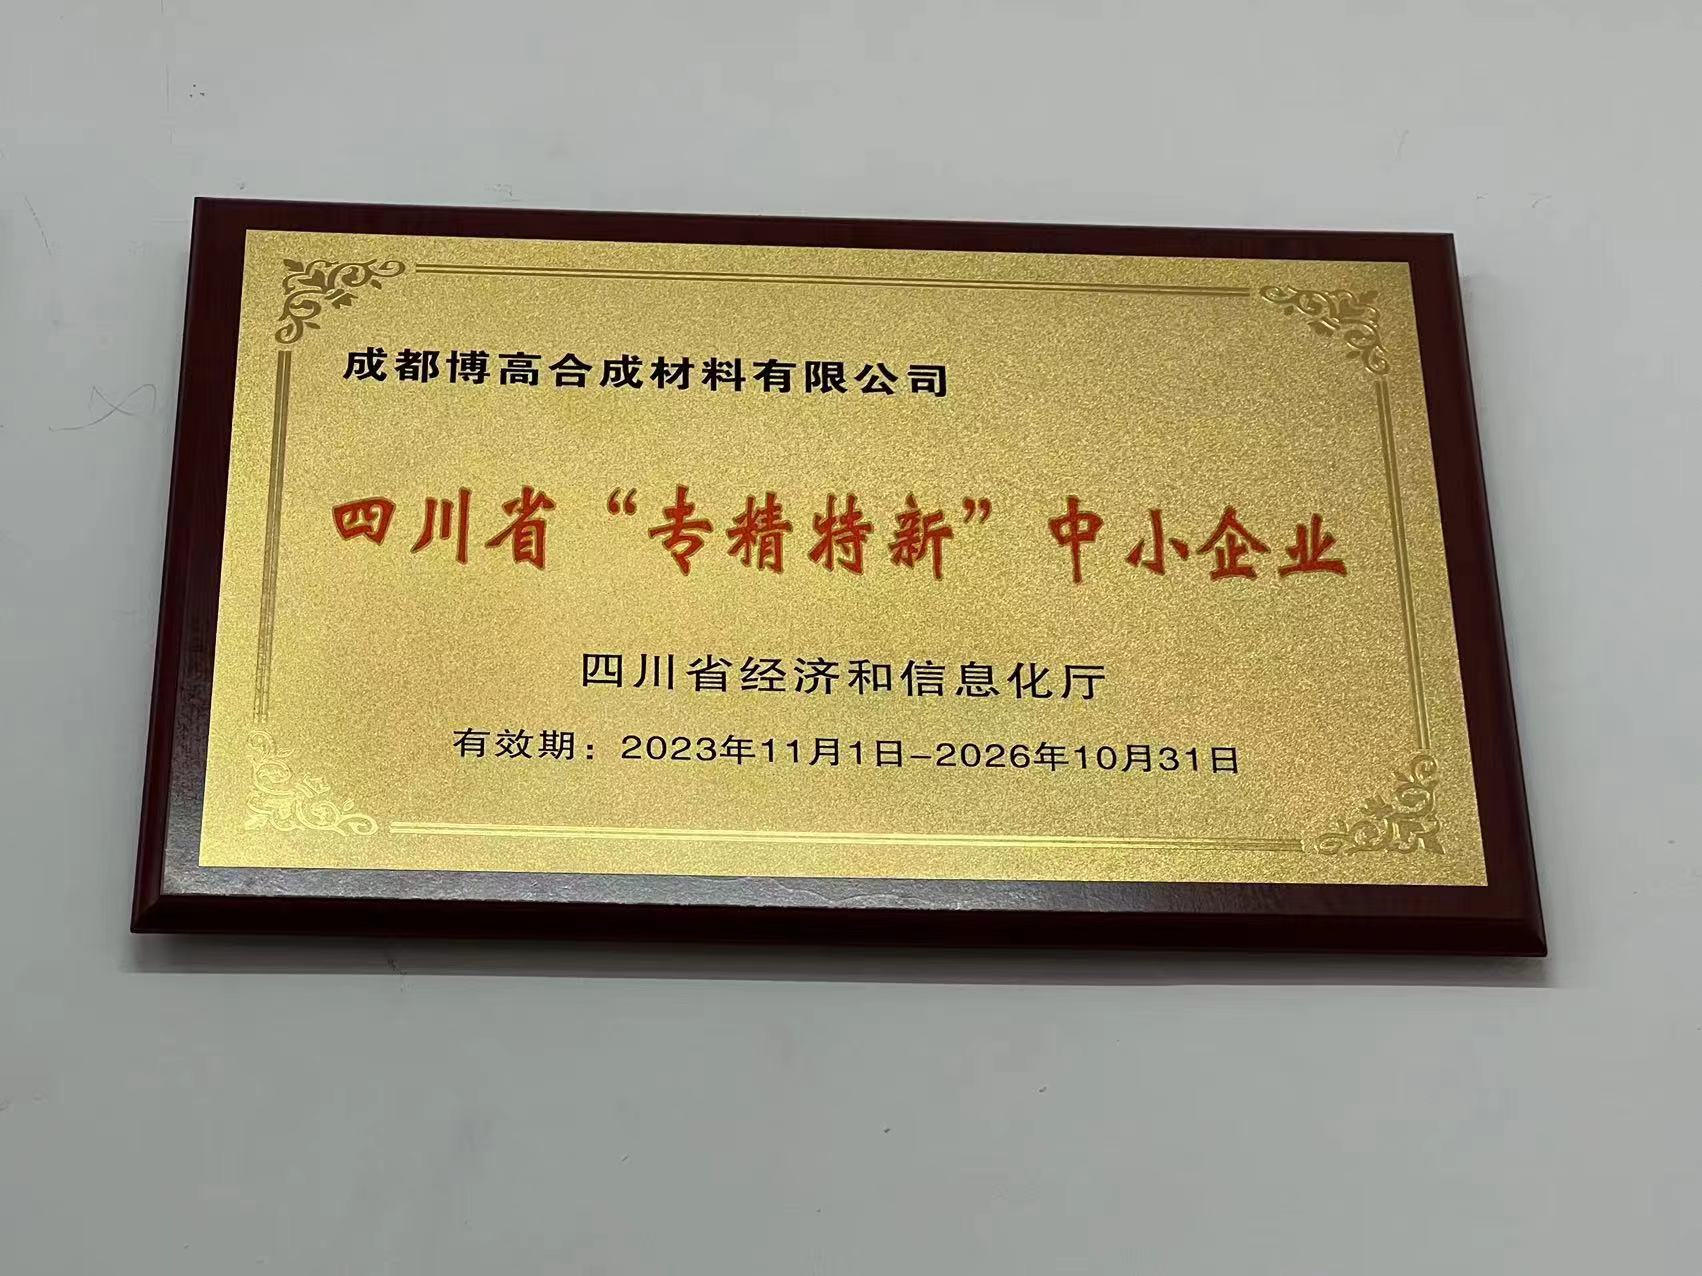 Chengdu BoGao Synthetic Materials Co., Ltd. selected as Specialized and Sophisticated SMEs in Sichuan Province